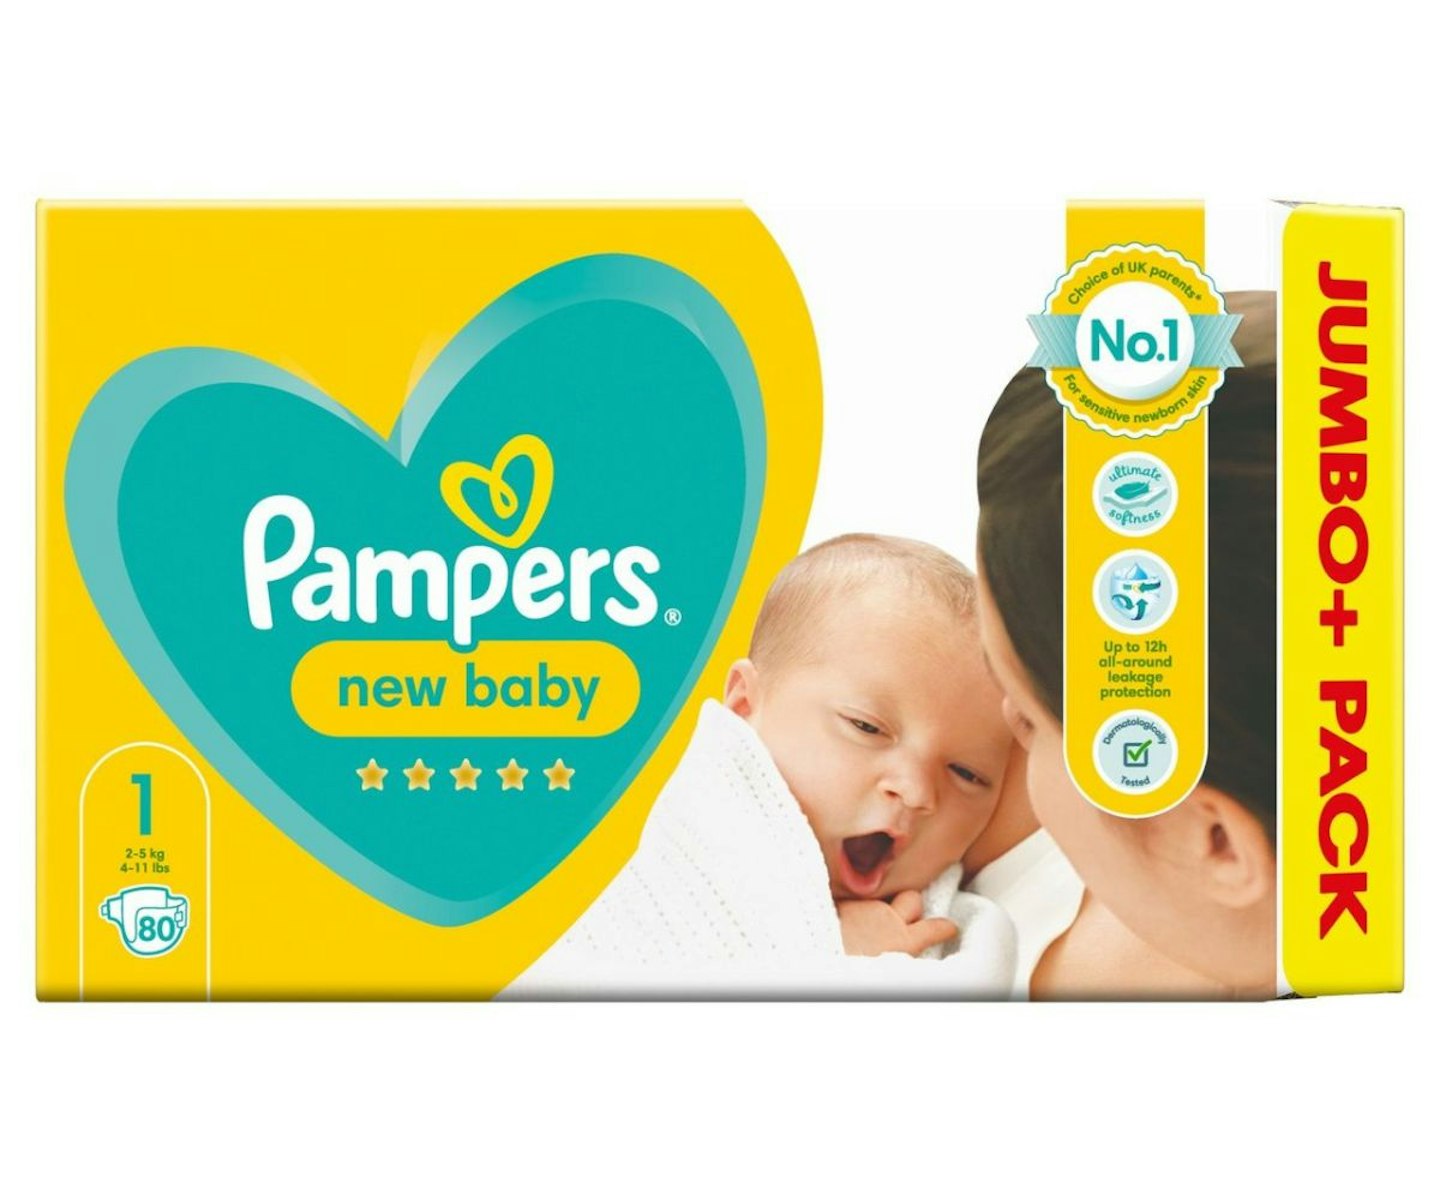 morrisons-baby-and-toddler-sale